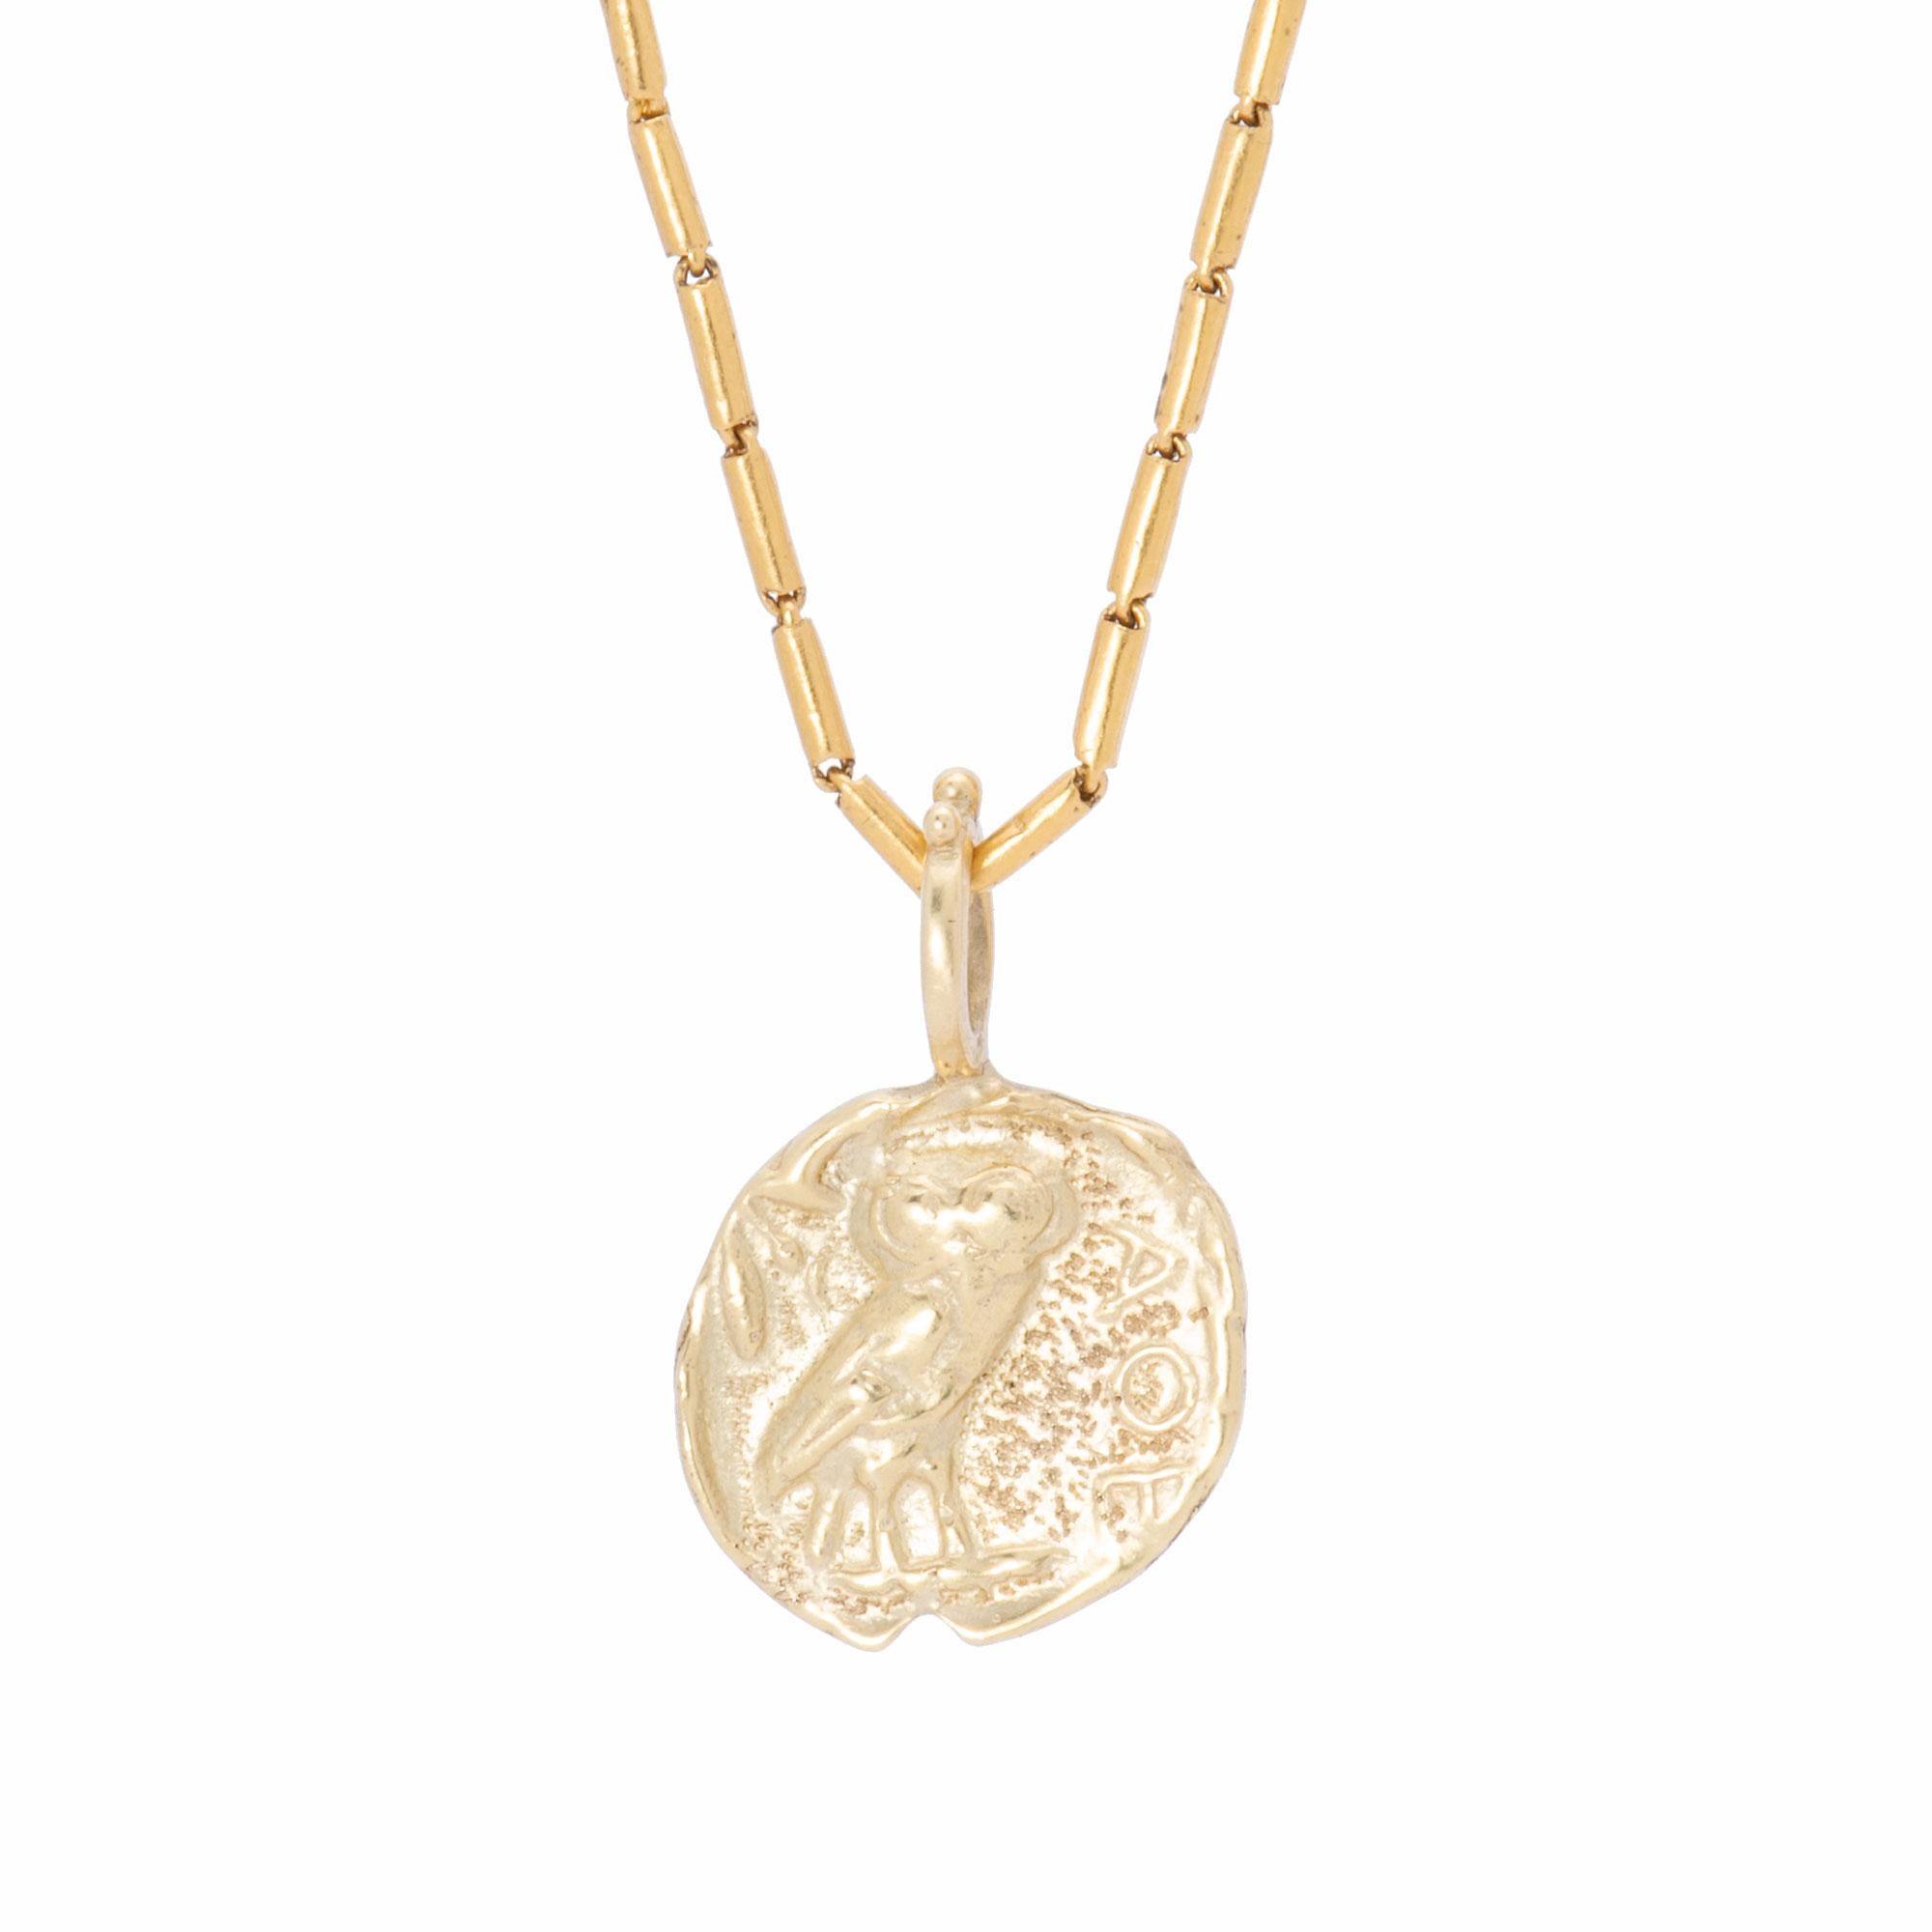 From Athena, Goddess of Wisdom, comes the 18k gold reproduction coin pendant bearing her animal totem, the owl. Athena's Owl Pendant in 18 karat gold is hand crafted in our studio with our signature satin finish. Perched in 3/4 profile, the owl